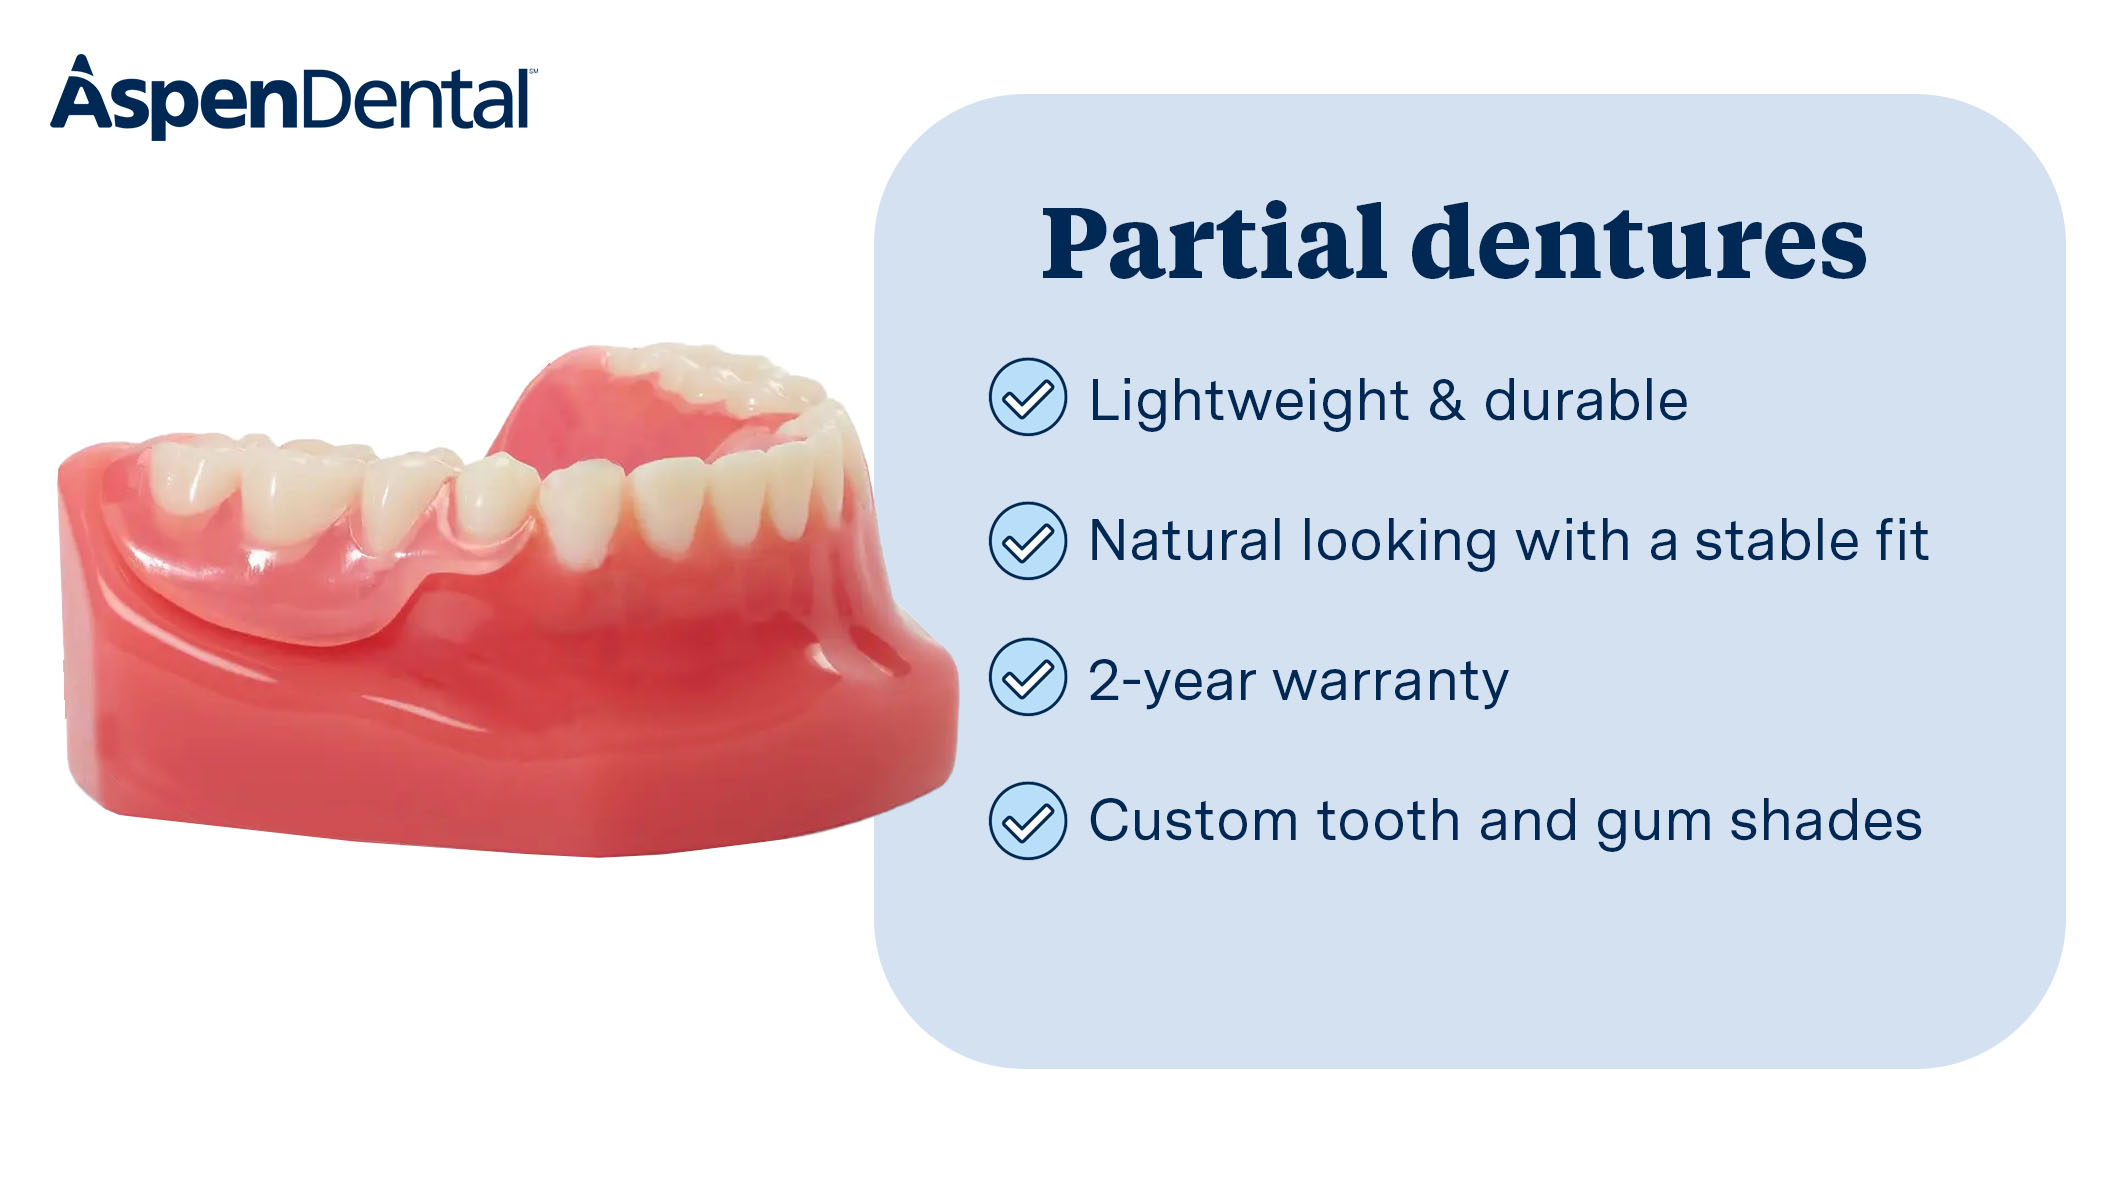 Restore your smile with our customizable partial dentures. Lightweight, durable, natural-looking, an Aspen Dental - Ashtabula, OH Ashtabula (440)969-1247